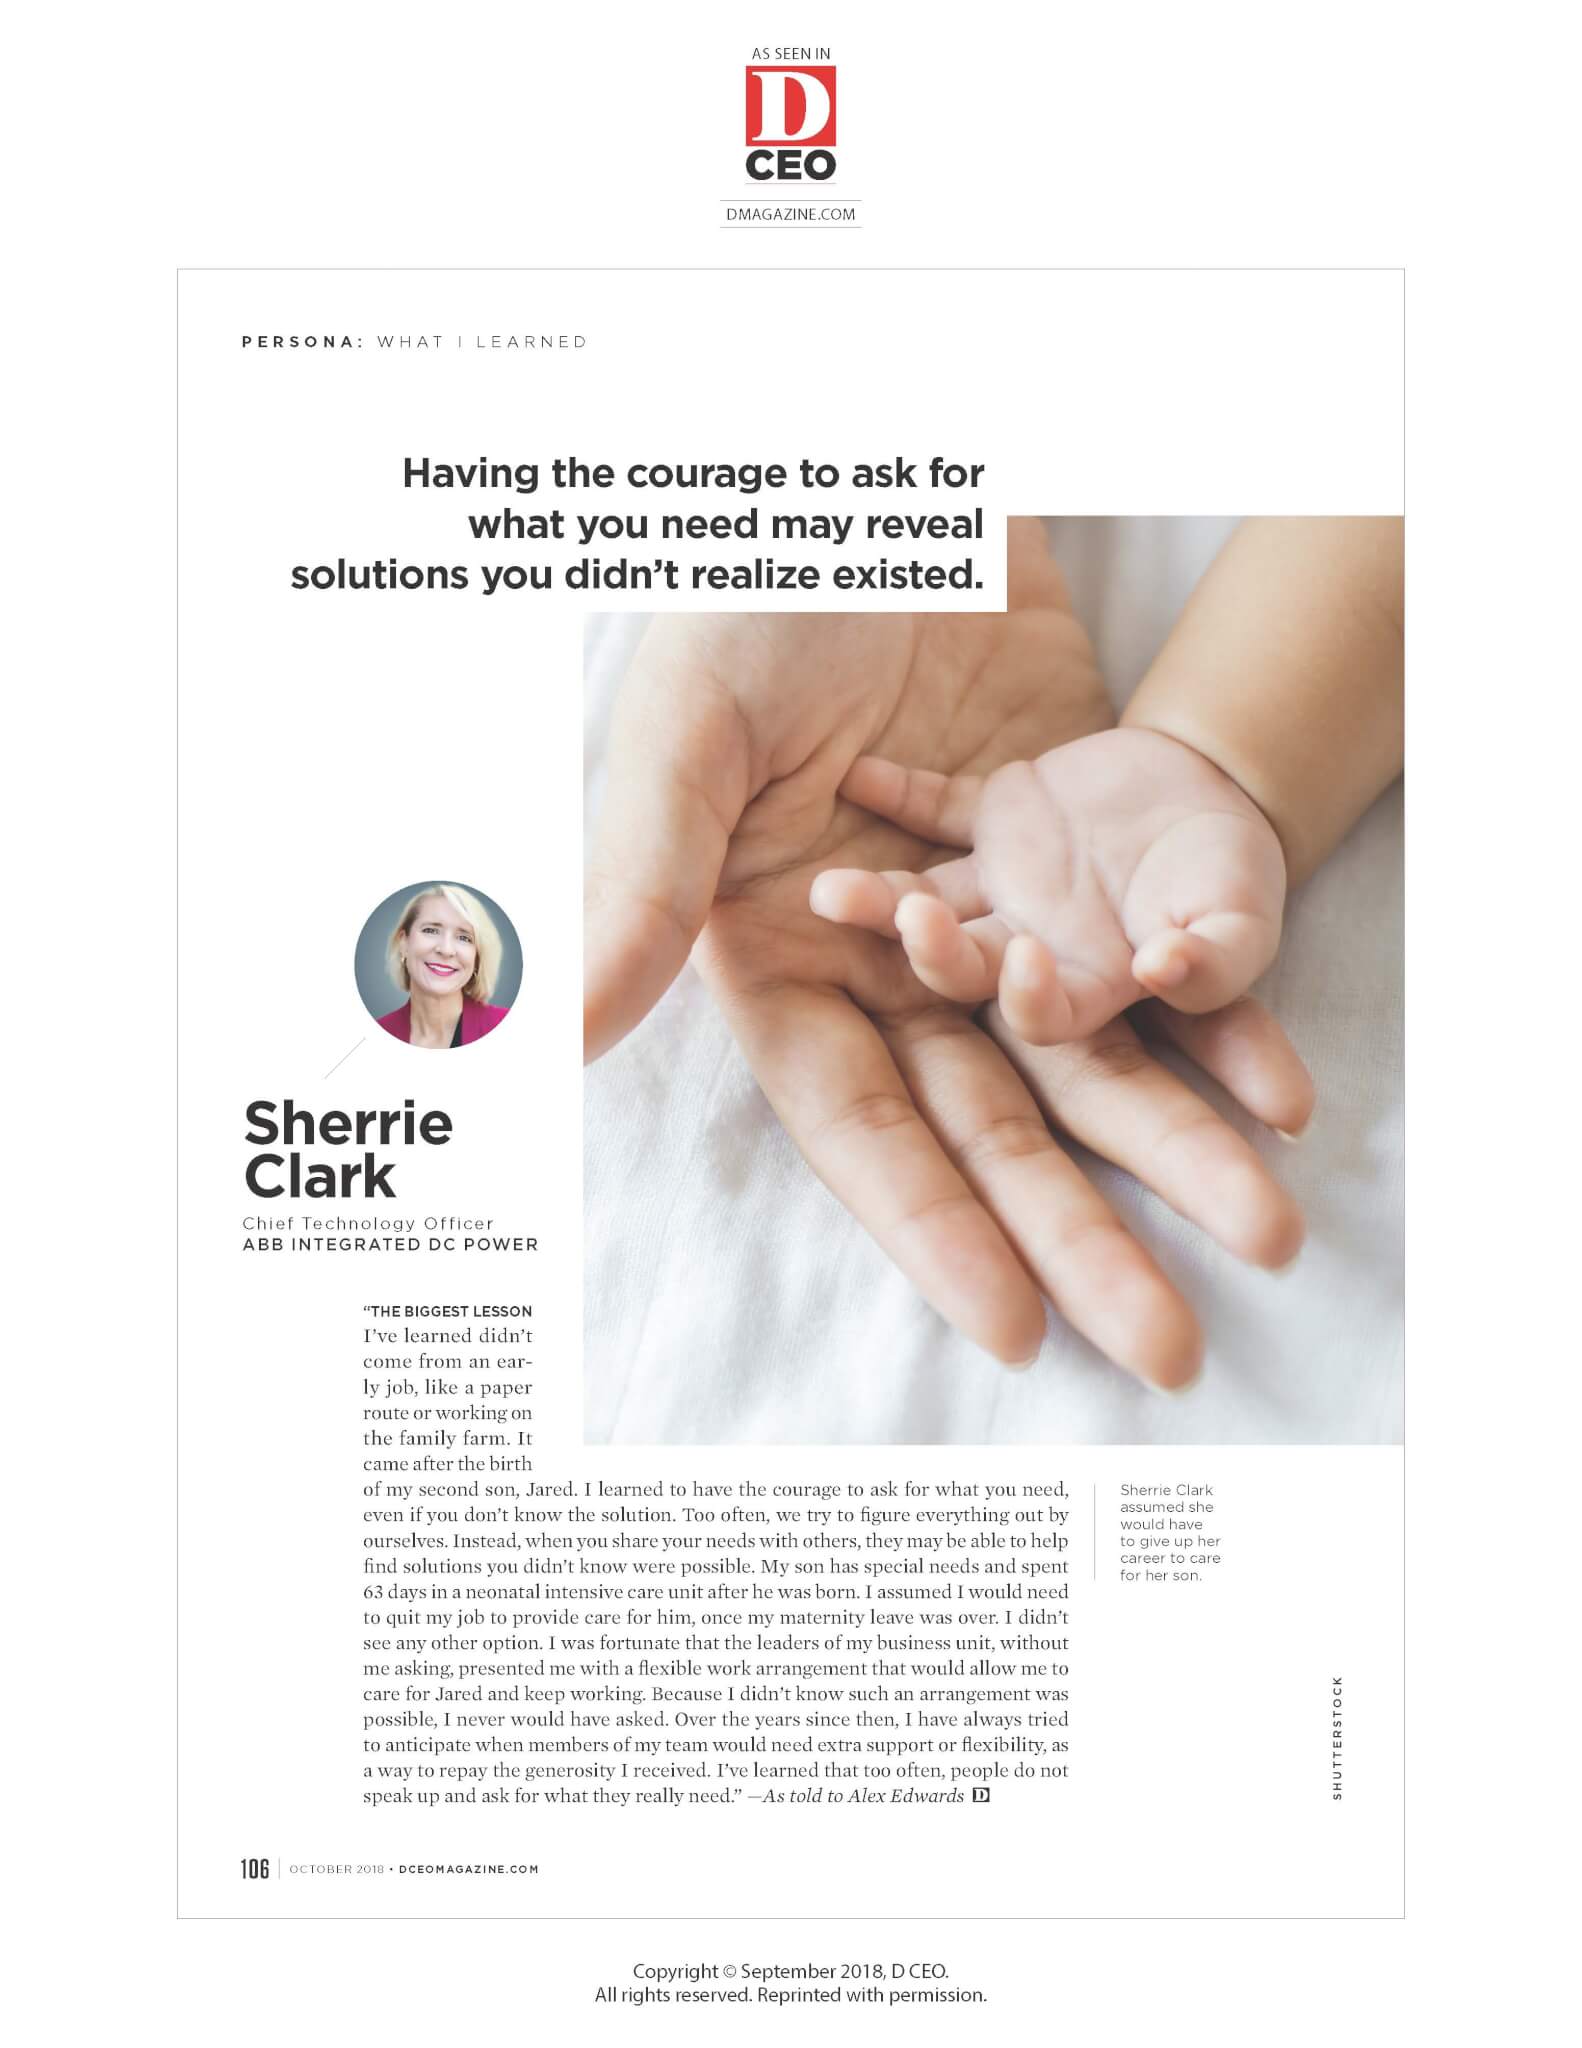 sherrie-clark-courage-to-be-seen-article